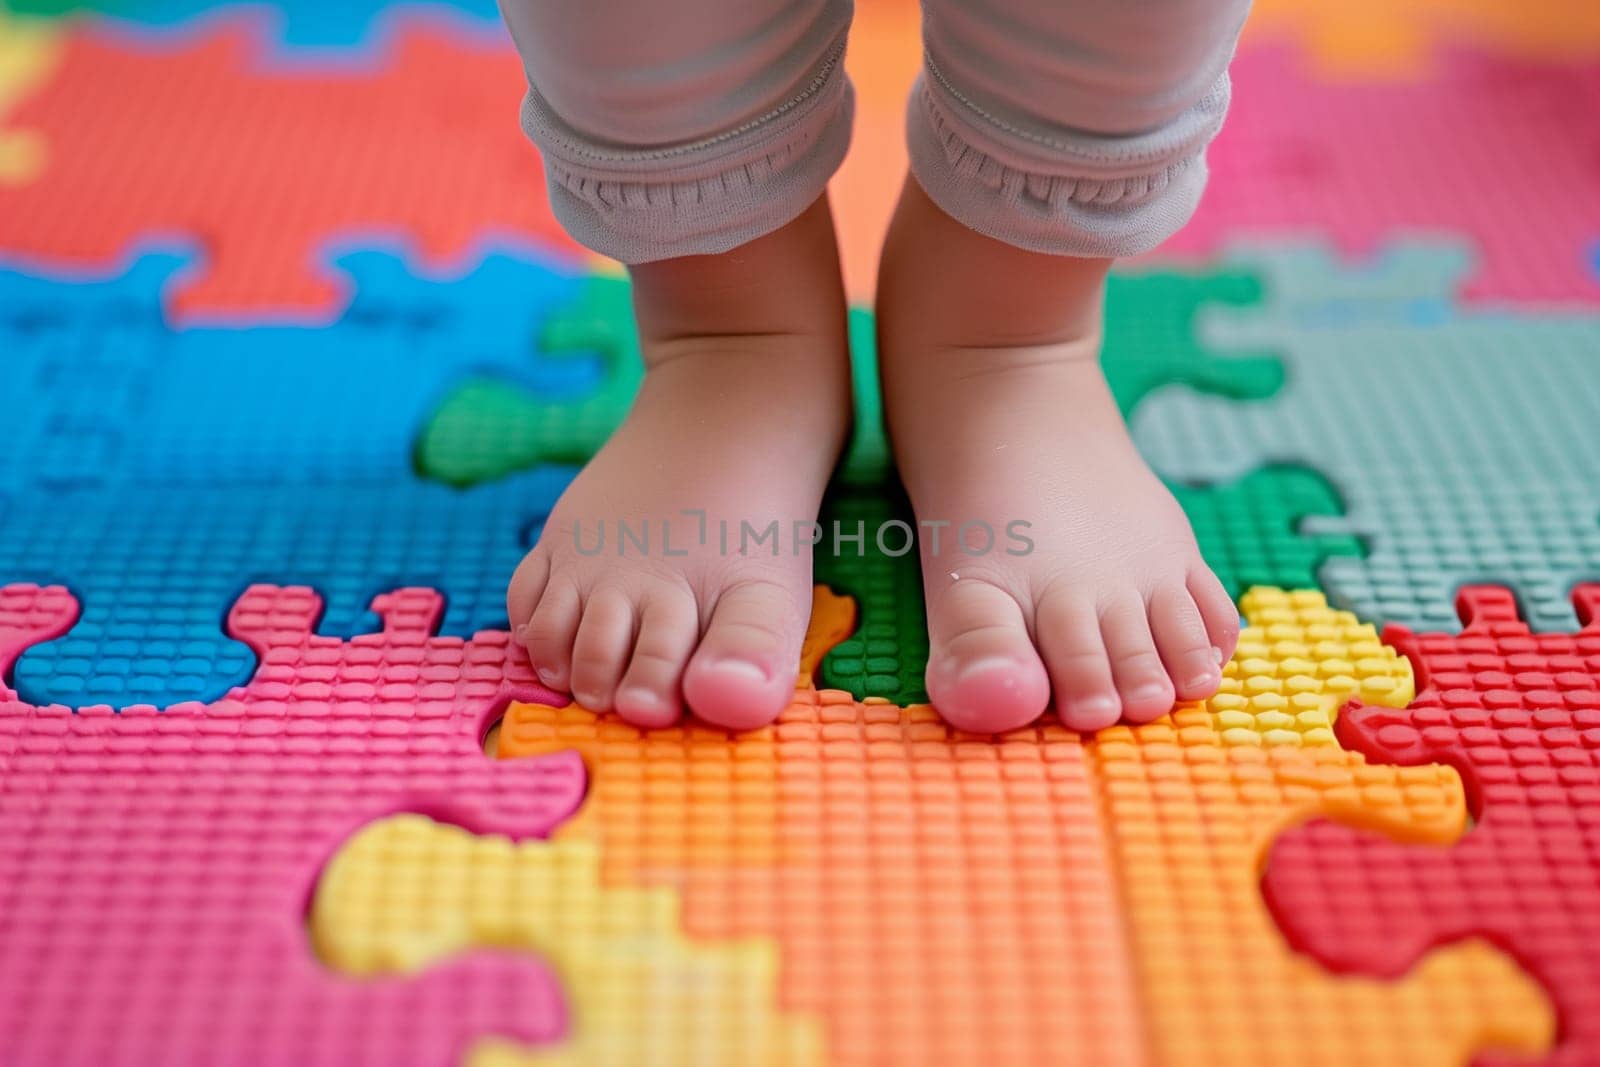 Childs Feet Standing on Colorful Jigsaw Puzzle by Sd28DimoN_1976